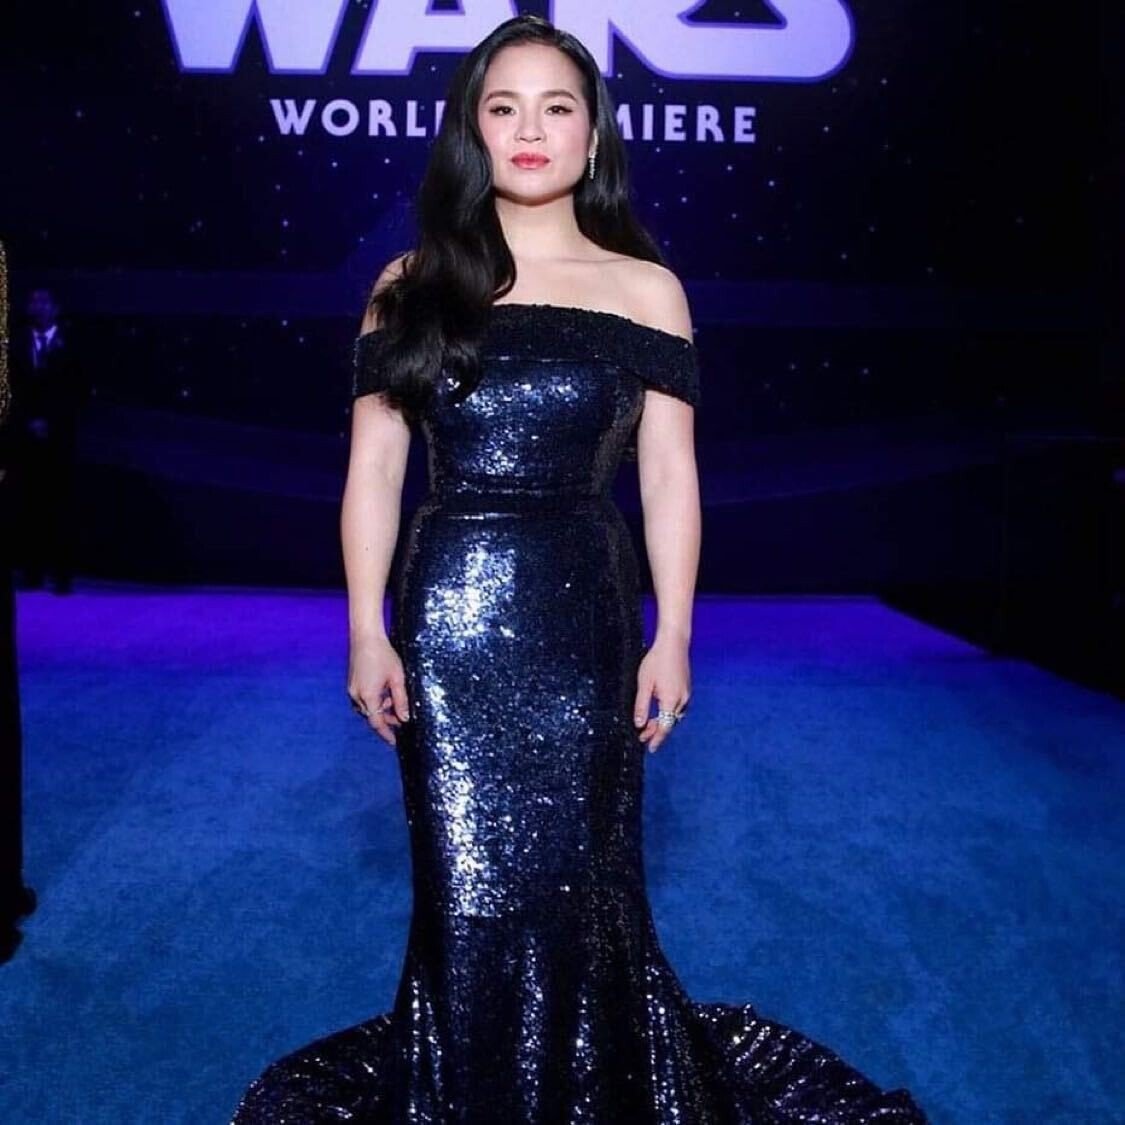 By starring in Star Wars: The Rise of Skywalker, Kelly Marie Tran was the first Asian-American woman cast for a major role in the record-breaking Hollywood franchise. Photo: @swsequels/Instagram